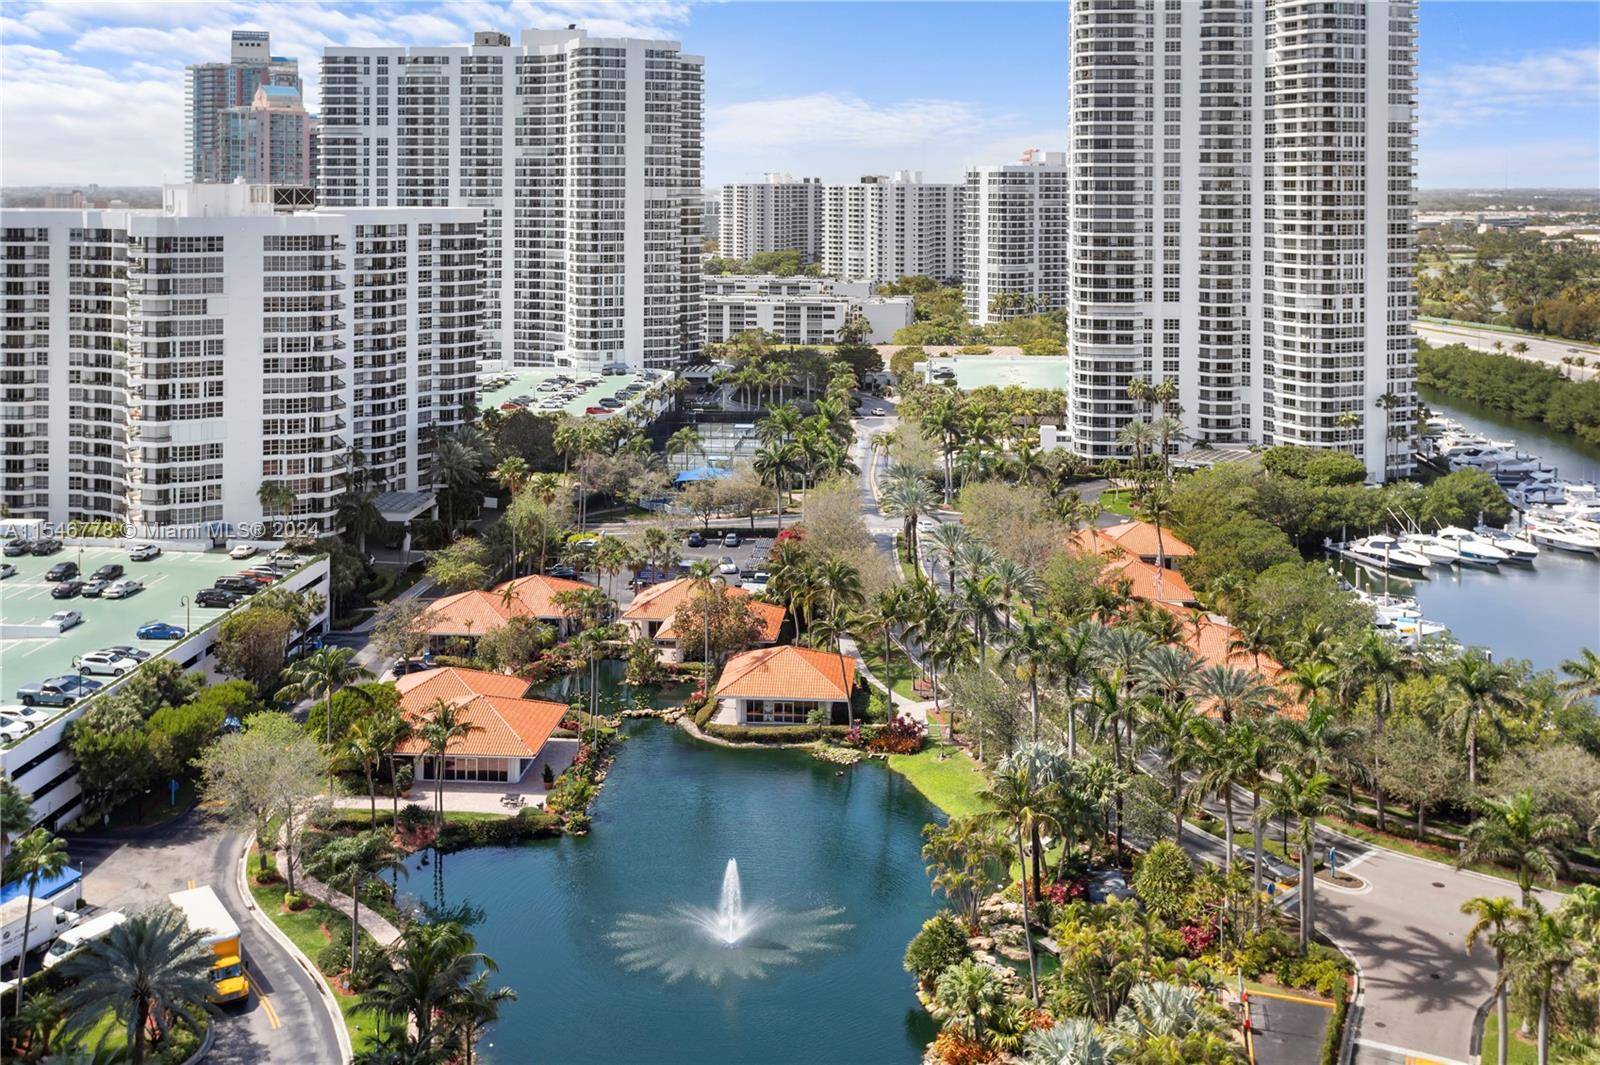 Located in Aventura's prime spot, this 2 bed, 2 bath apartment boasts ample space, abundant natural light, and views of a fountain with a partial intra coastal glimpse.